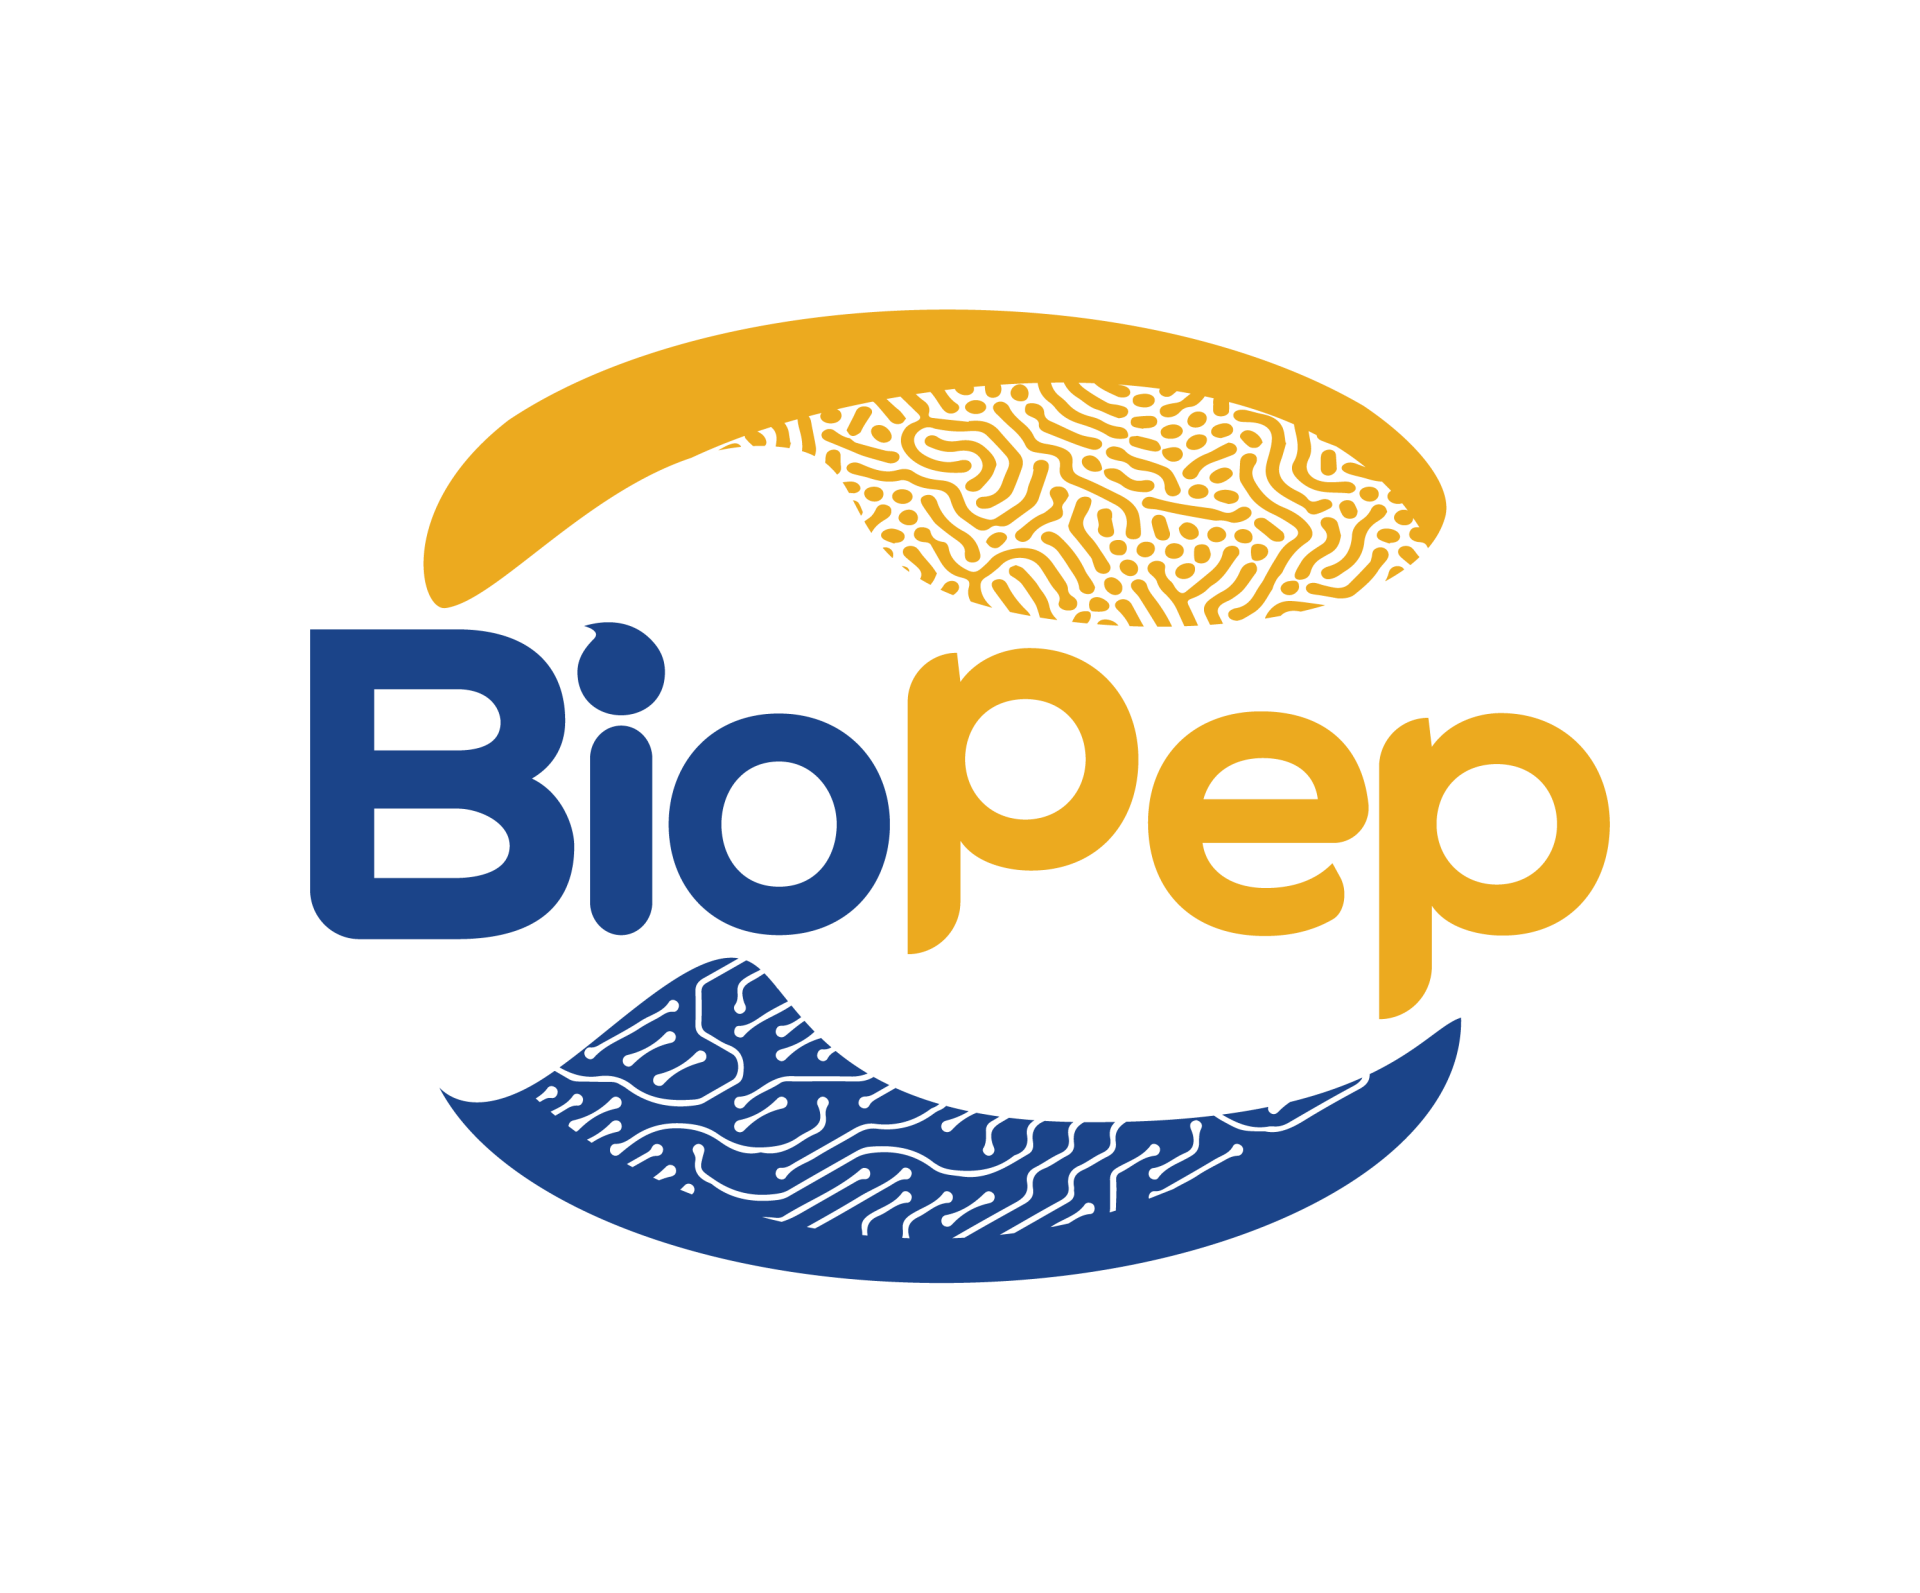 BioPep – A research and development (R&D) start-up subsidiary of European Wellness Biomedical Group